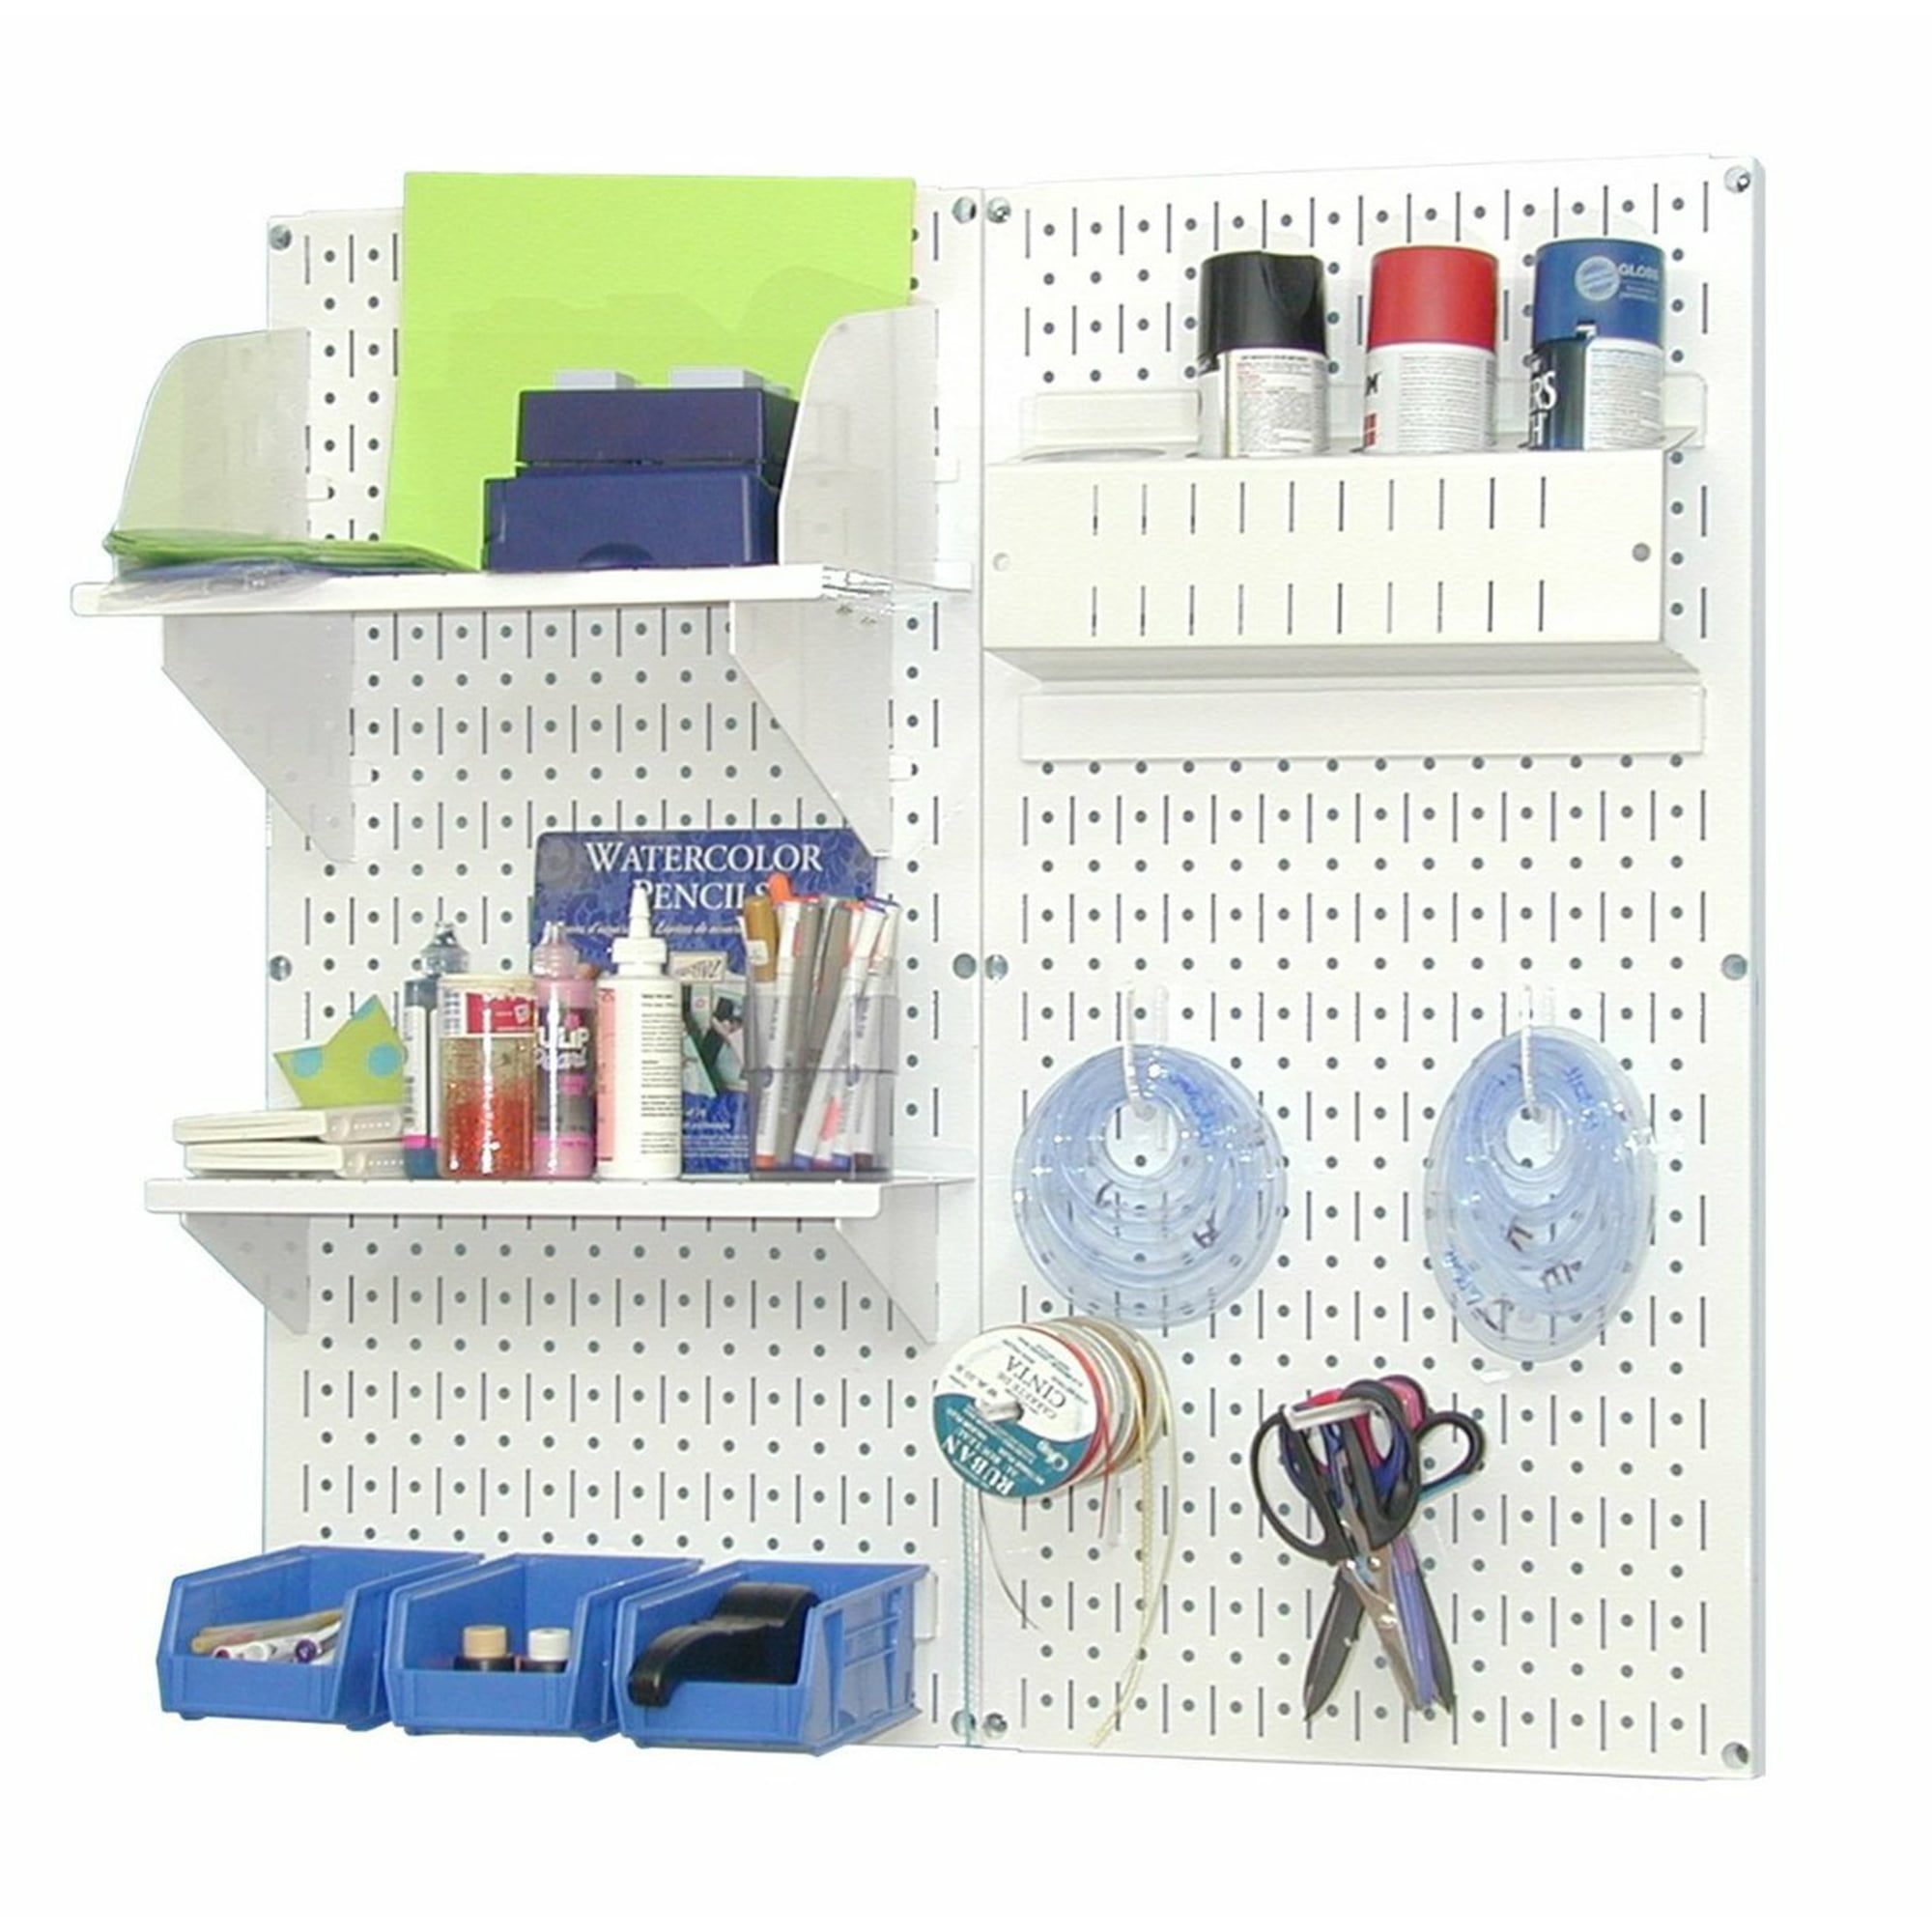 Mount Display Pegboard Kits Fit Pegboard Organizer and Storage for Craft Room Garage Kitchen Easy installation White Pegboard Wall 6pcs Pegboard Wall Organizer Panels Peg Boards for Walls 